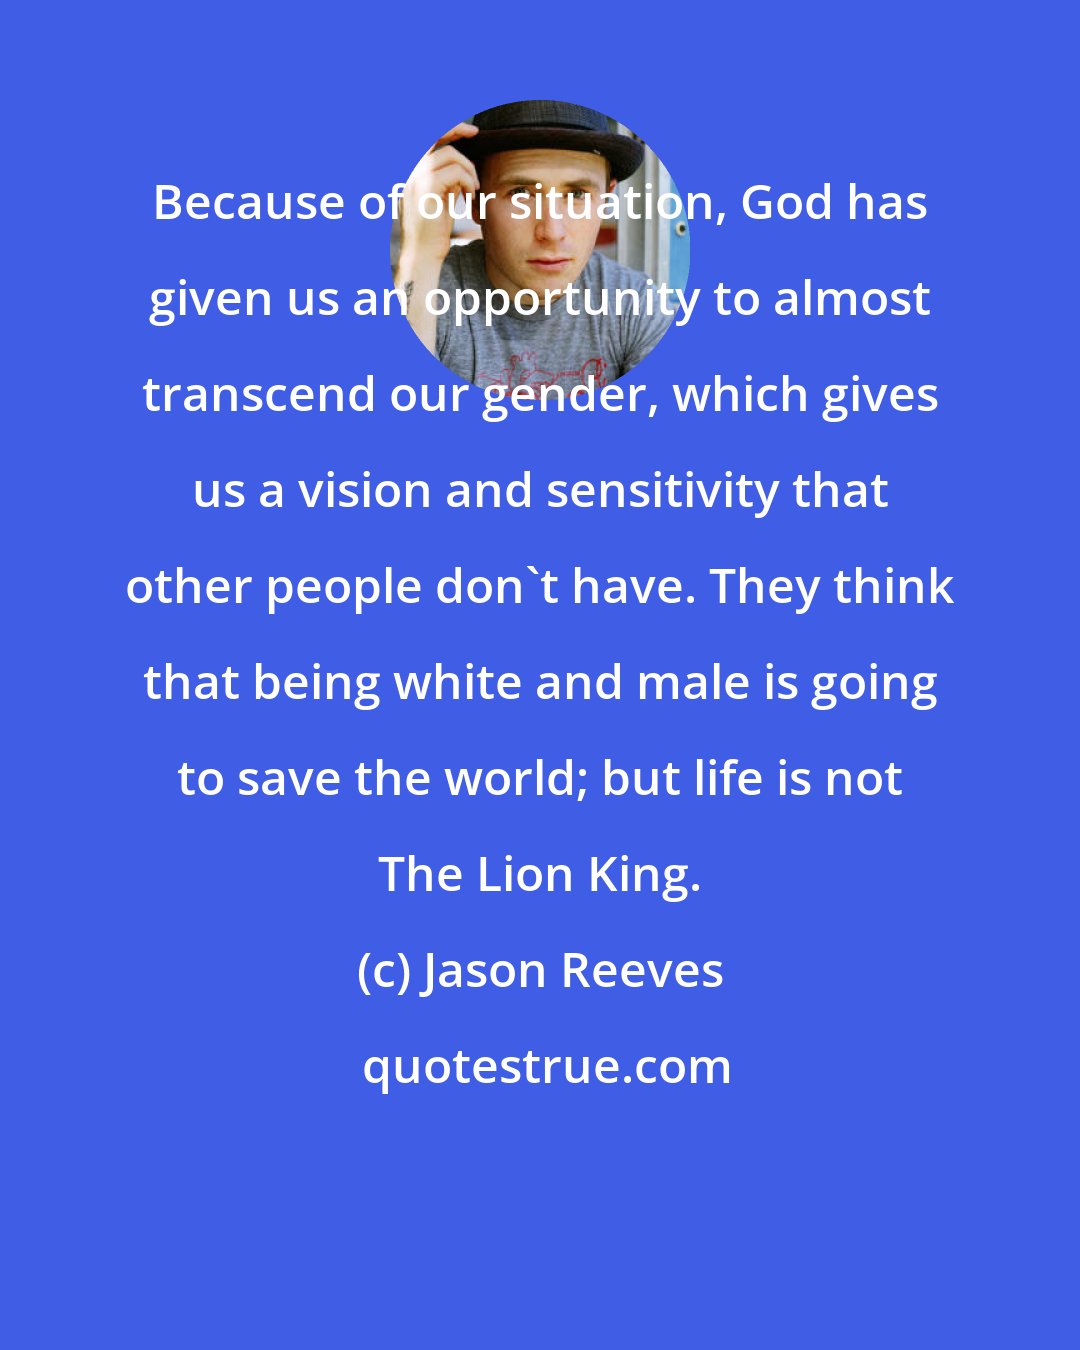 Jason Reeves: Because of our situation, God has given us an opportunity to almost transcend our gender, which gives us a vision and sensitivity that other people don't have. They think that being white and male is going to save the world; but life is not The Lion King.